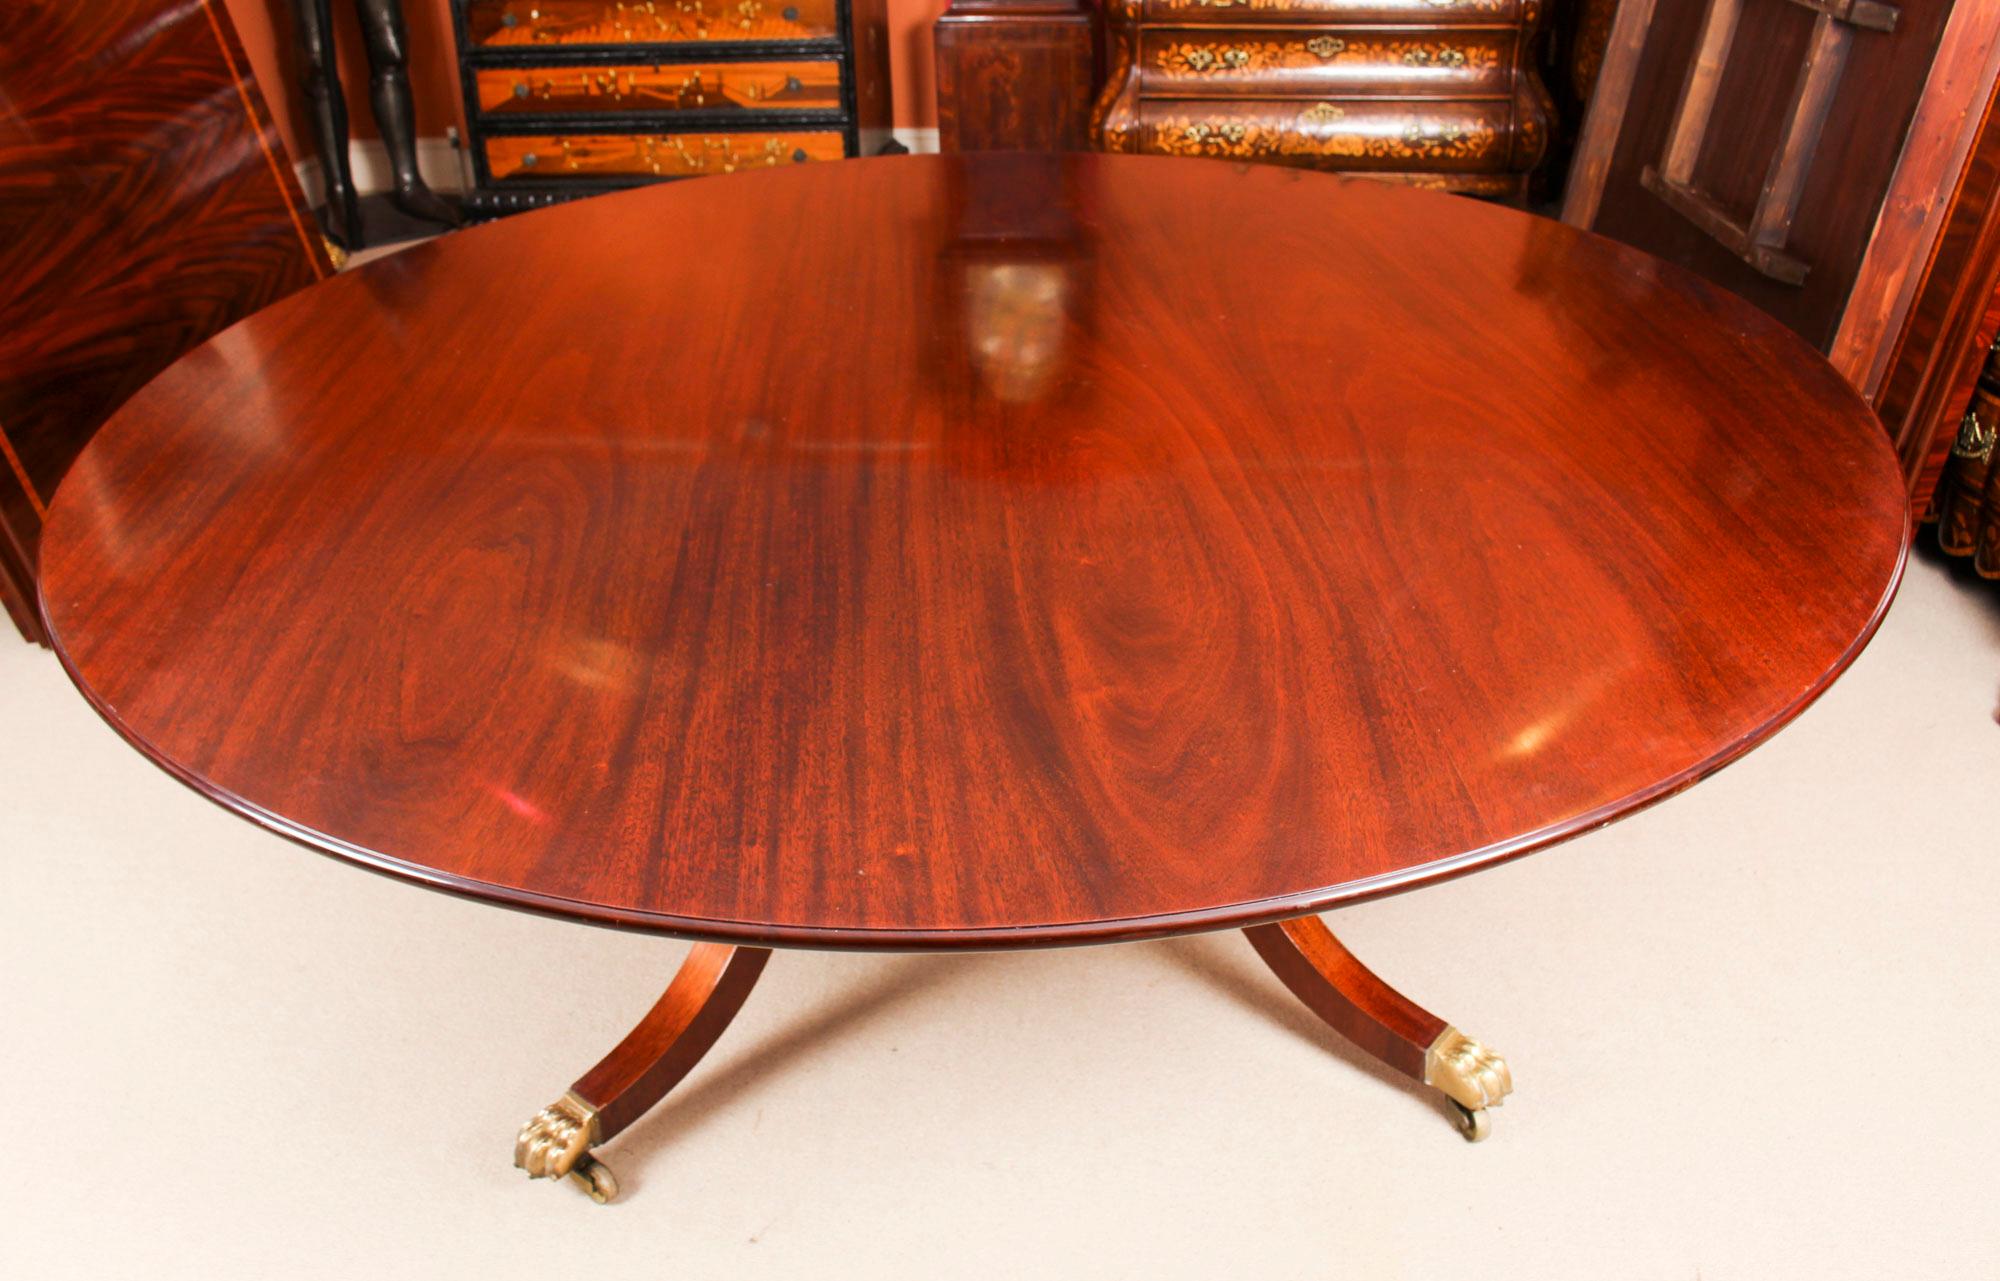 English Vintage Round Table and 8 Chairs William Tillman, 20th Century